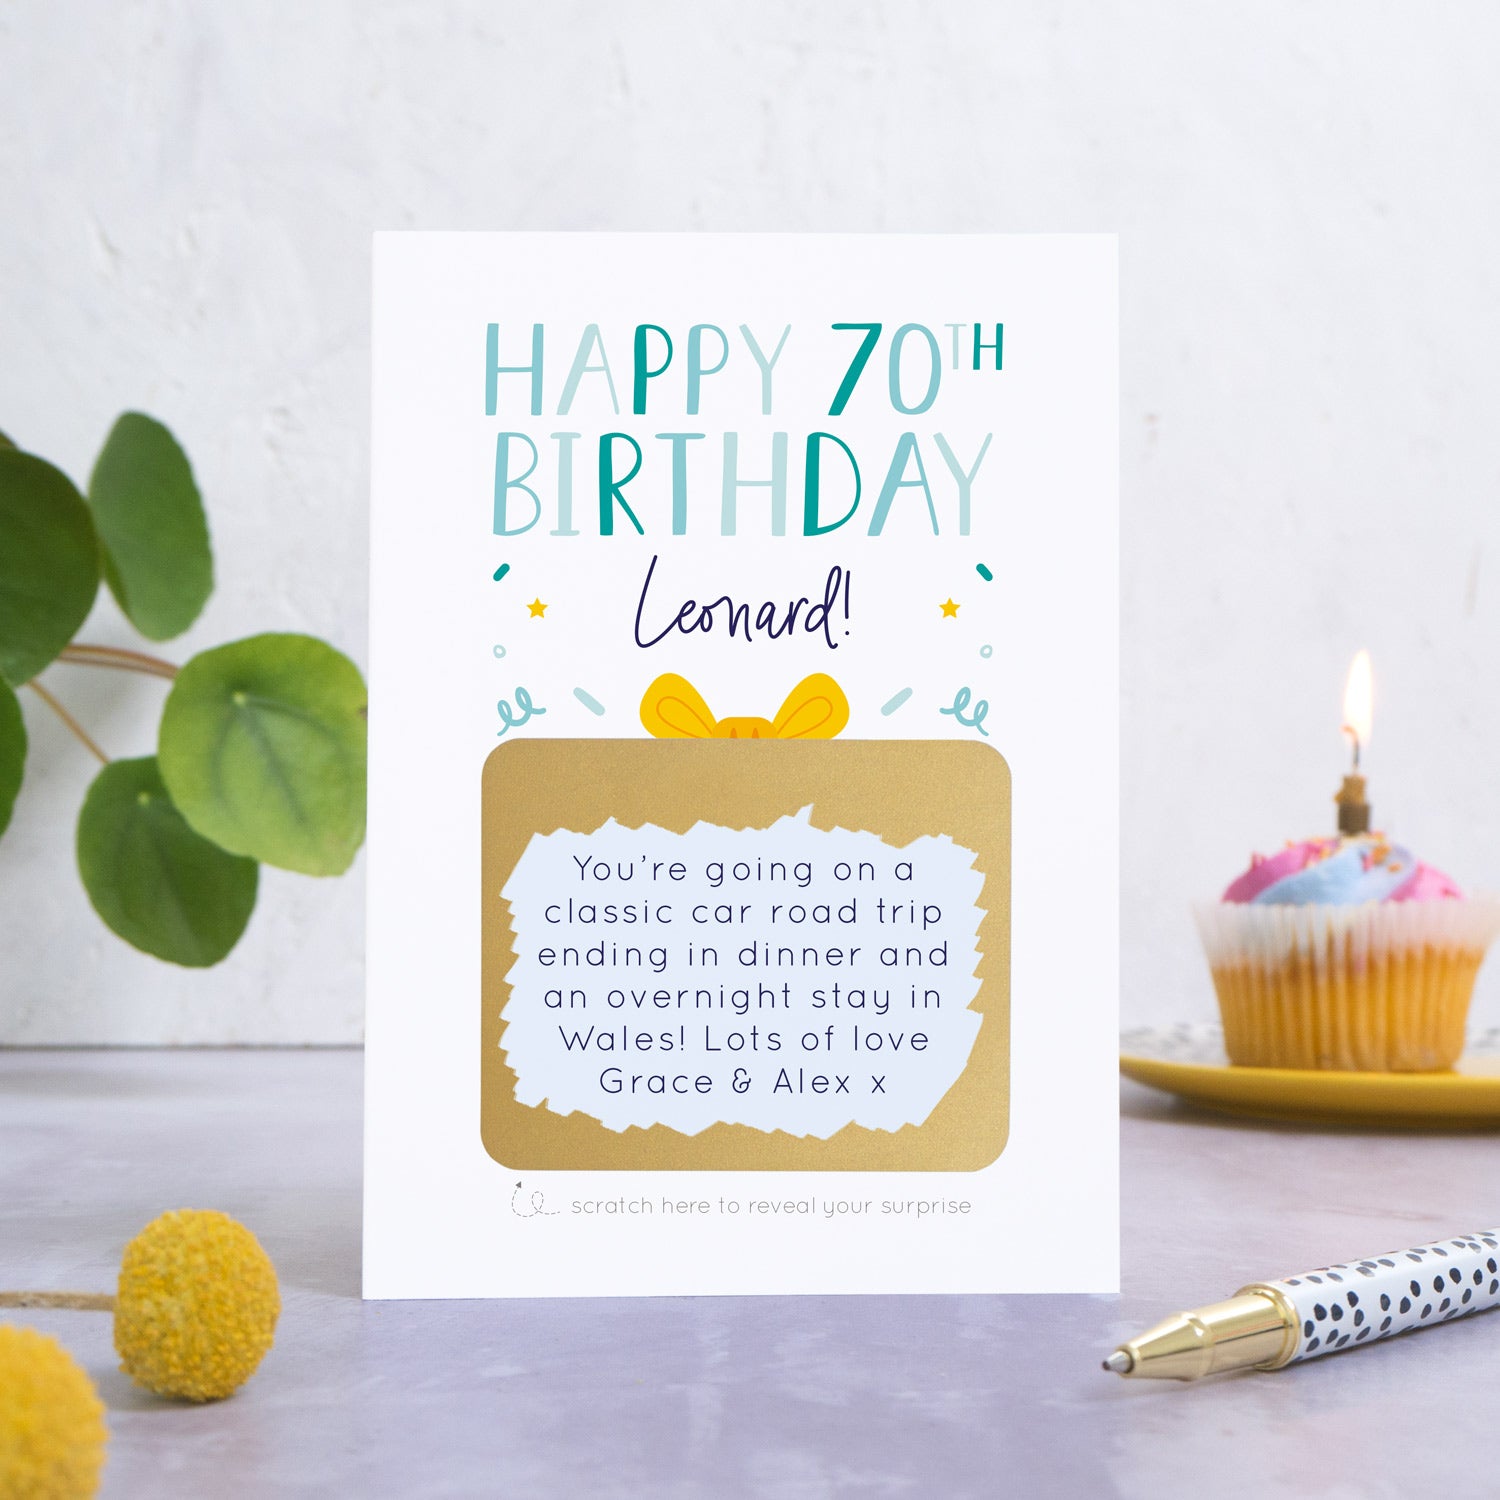 A personalised happy 70th birthday scratch card in blue that has been photographed on a white and grey background. There is foliage and yellow flowers on the left and a cupcake and a pen to the right. The card features the recipients name and a scratch panel that has been scratched off revealing a personalised message.